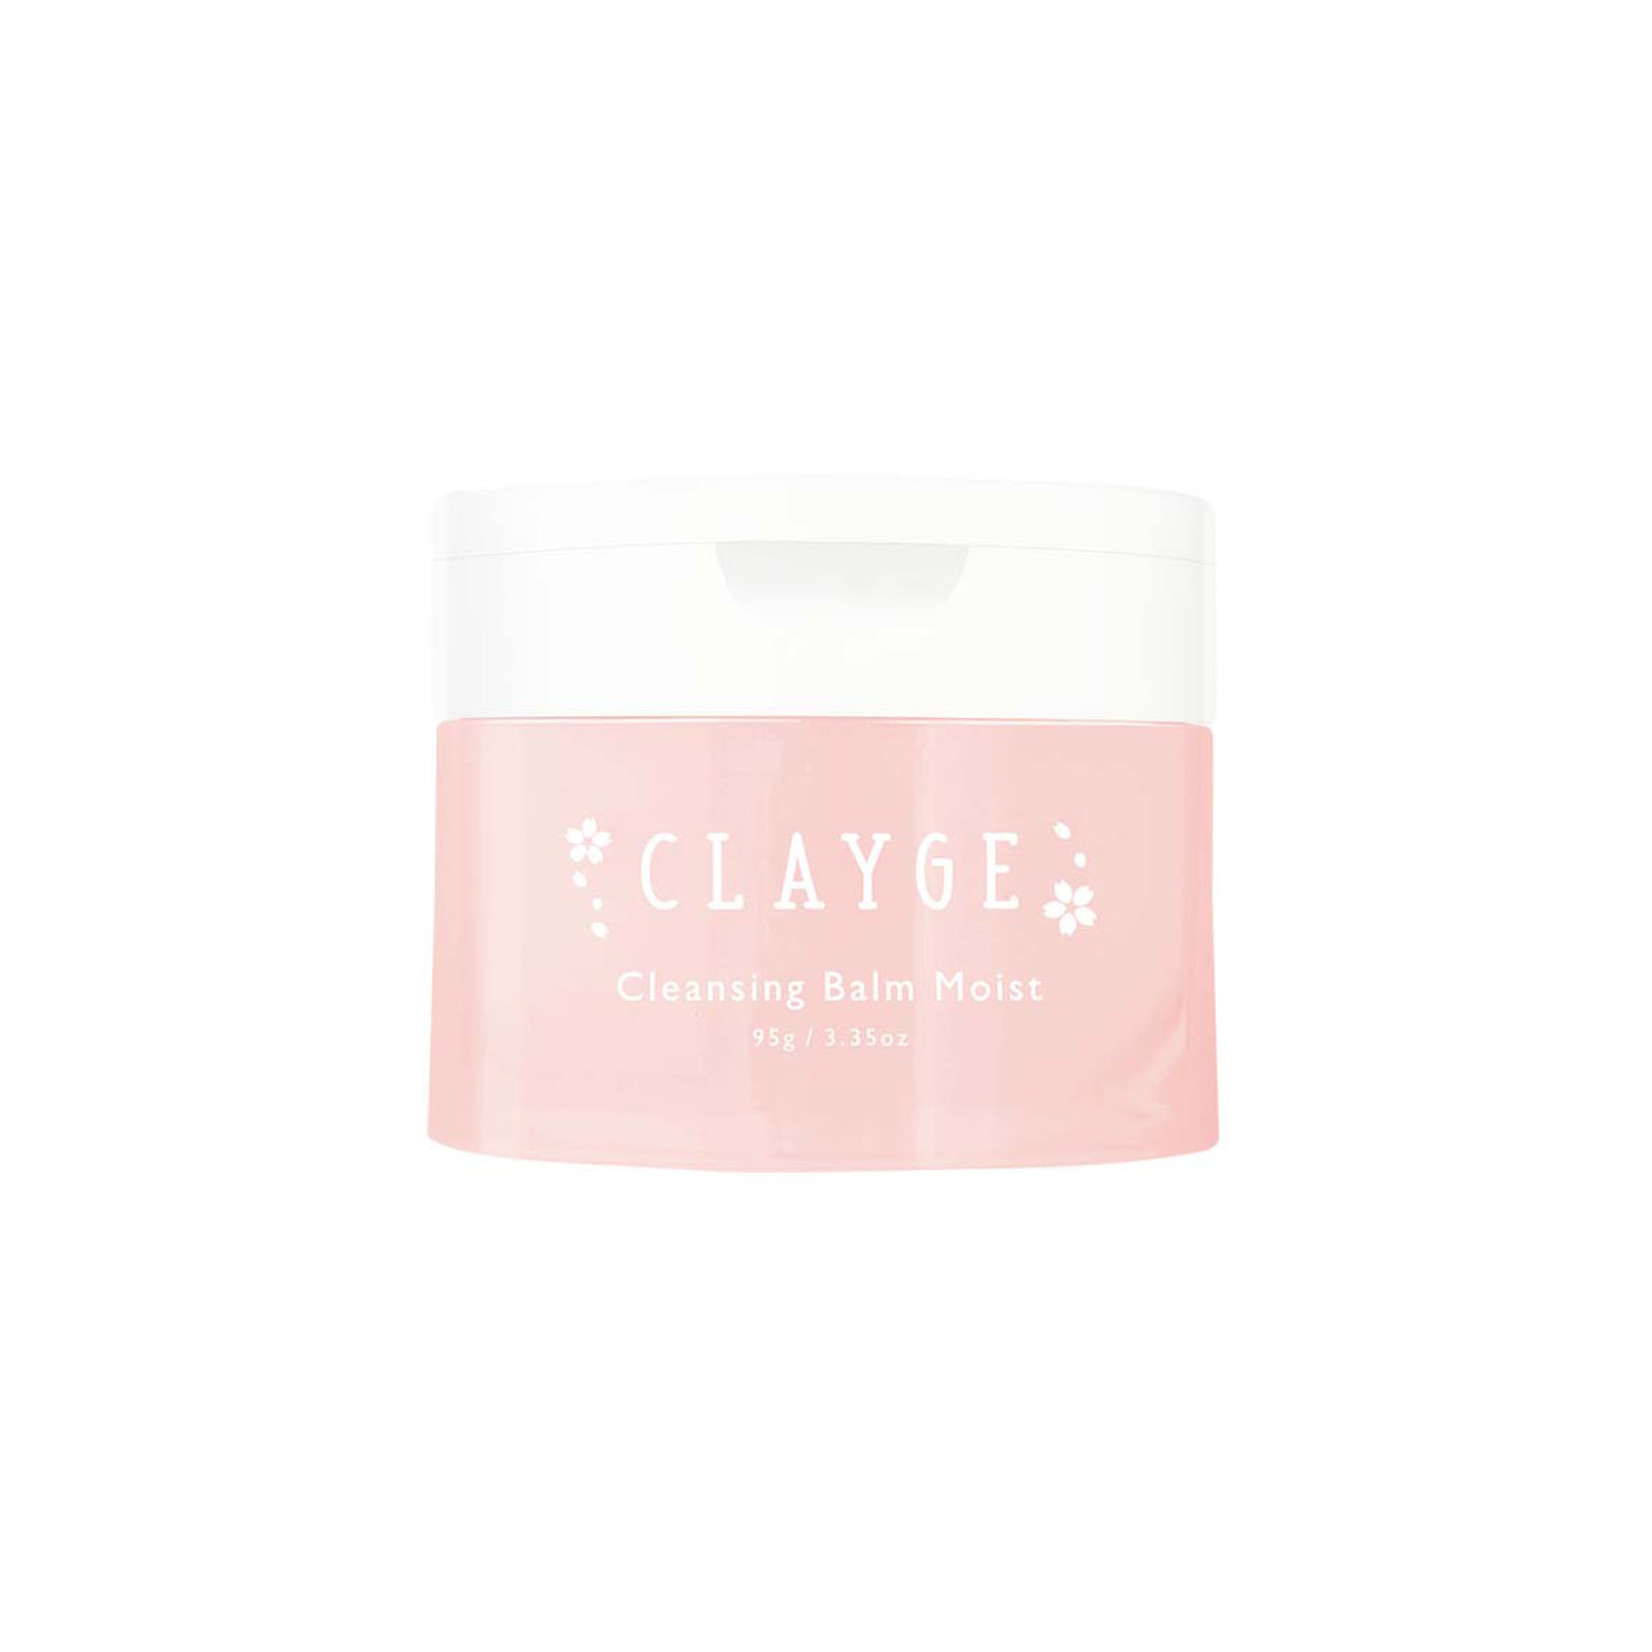 Clayge Cleansing Balm Moist - Sakura Limited